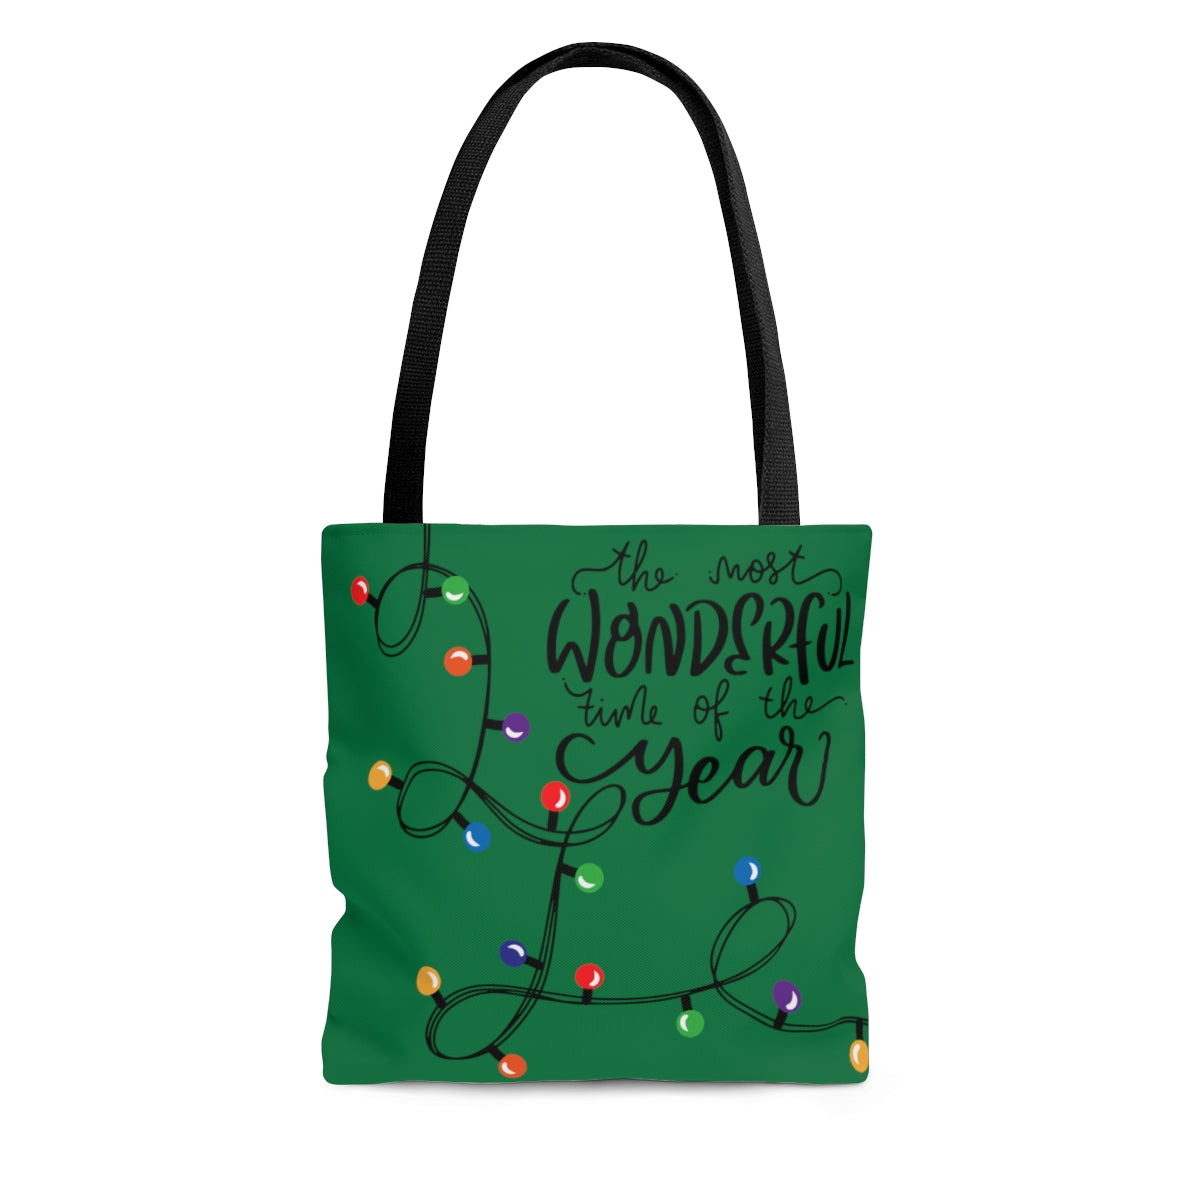 The Most Wonderful Time of Year Green Tote Bag - Travel Grocery Carry-on